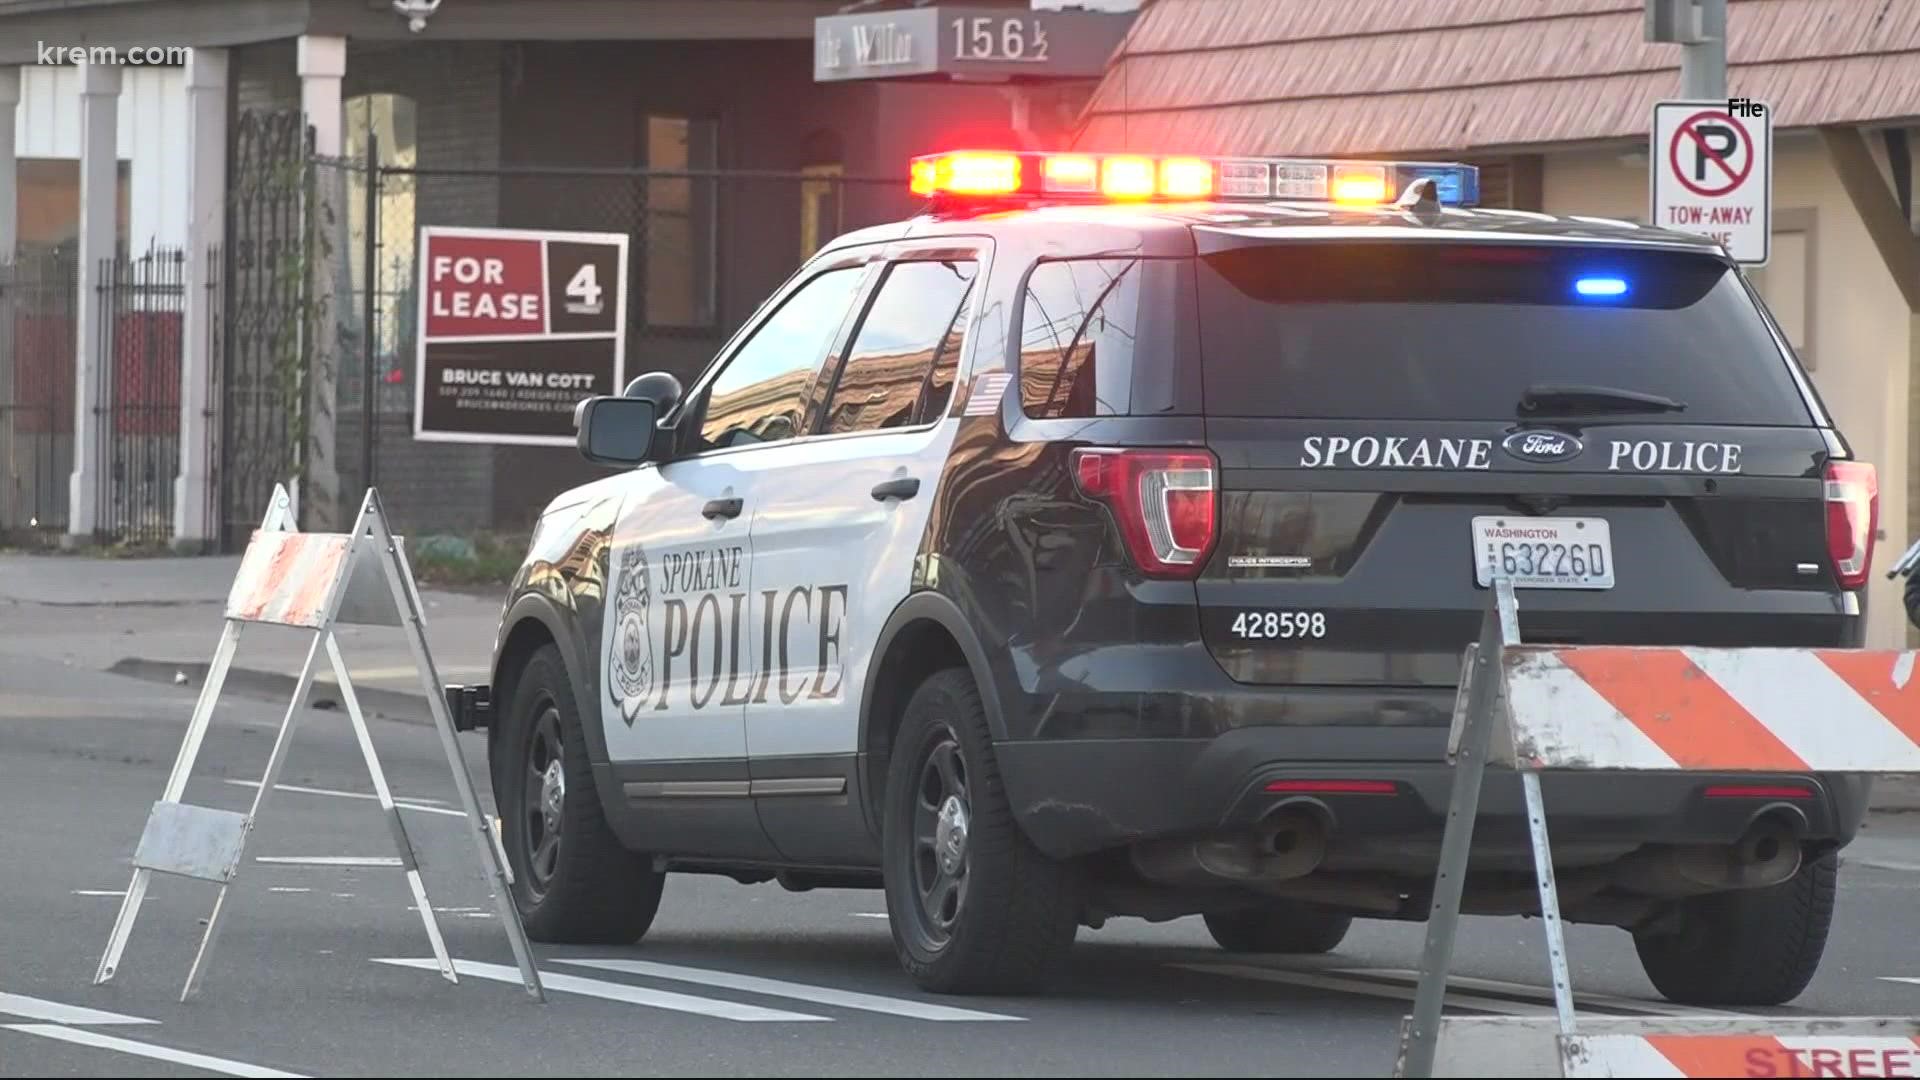 All 10 officers on the team have been reassigned to patrol duty due in part to the actions of two Spokane police officers.